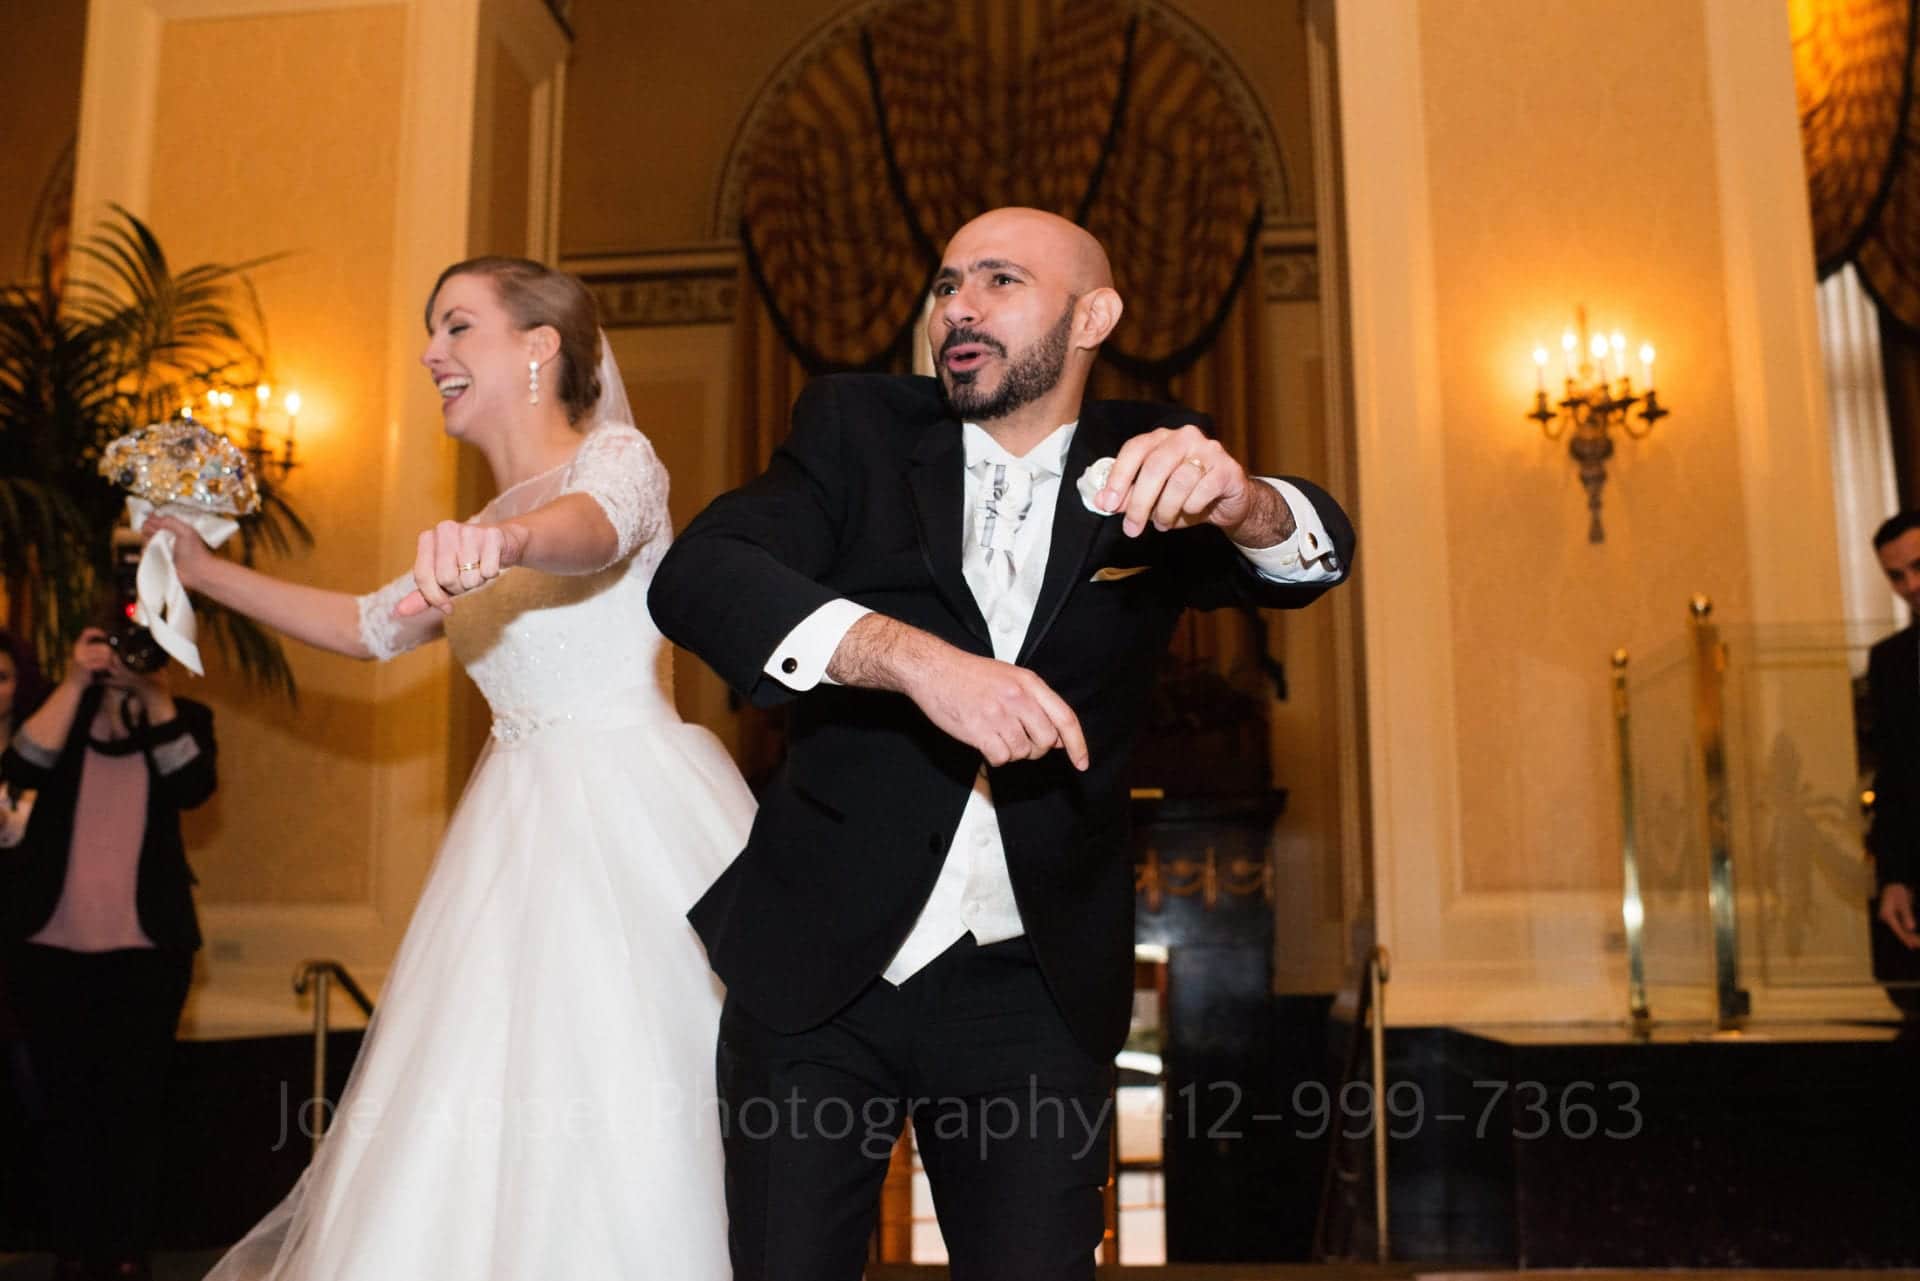 a bride and groom laugh and dance together